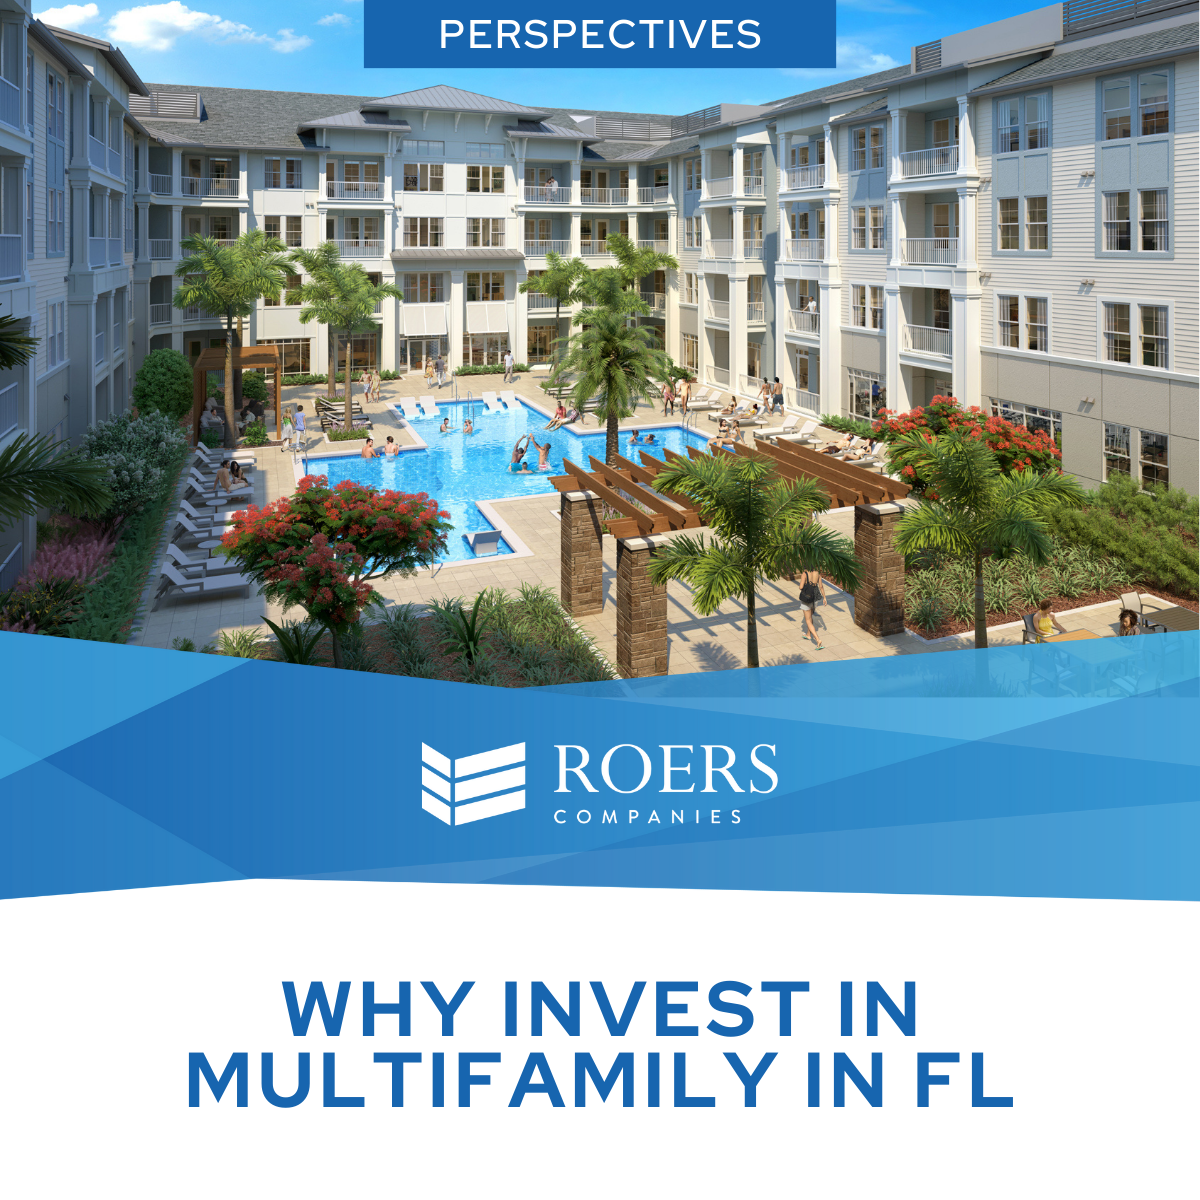 Marisol, Port Charlotte Florida - why invest in FL